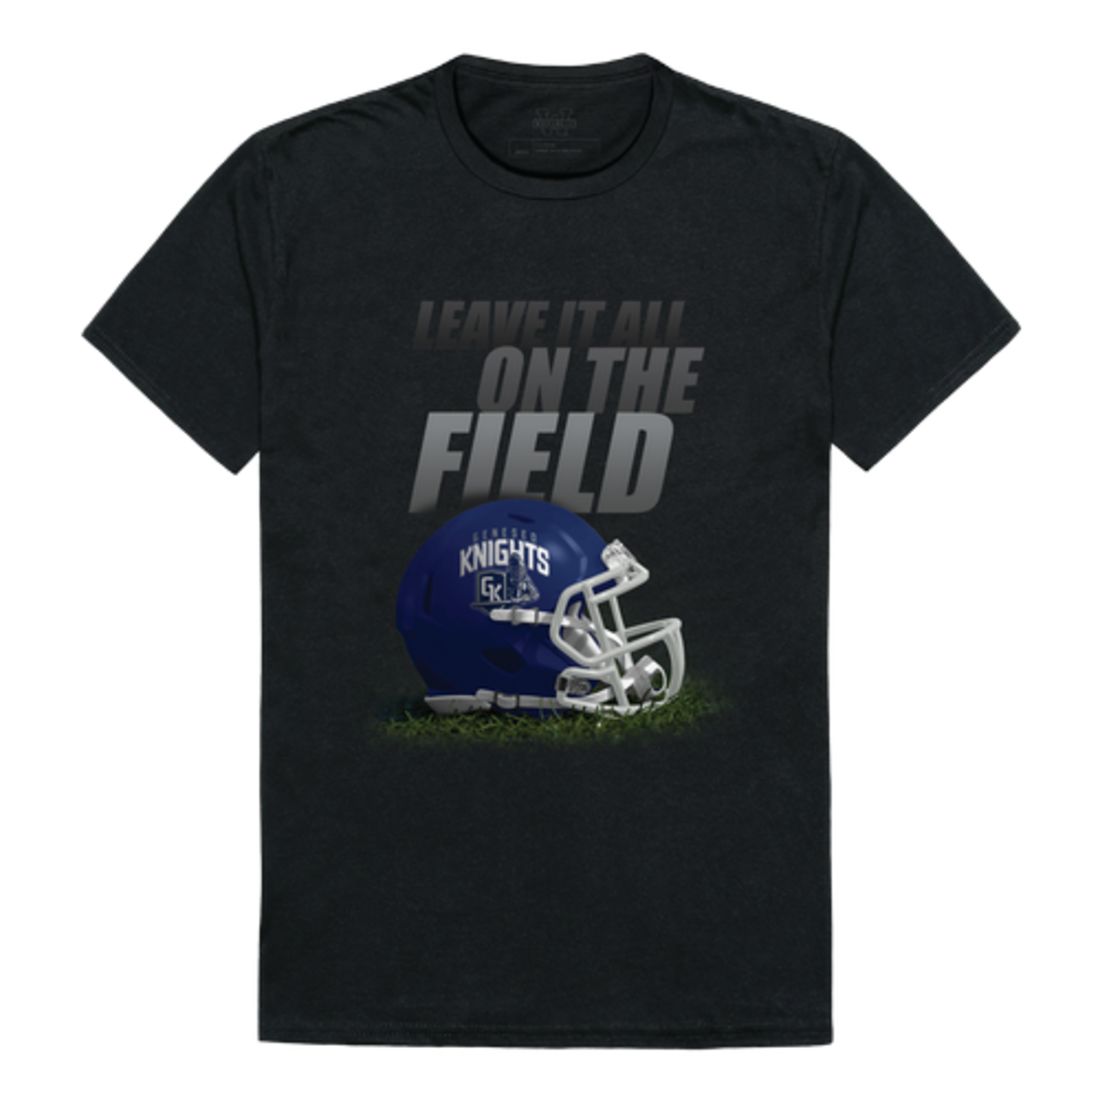 State University of New York at Geneseo Knights Gridiron T-Shirt